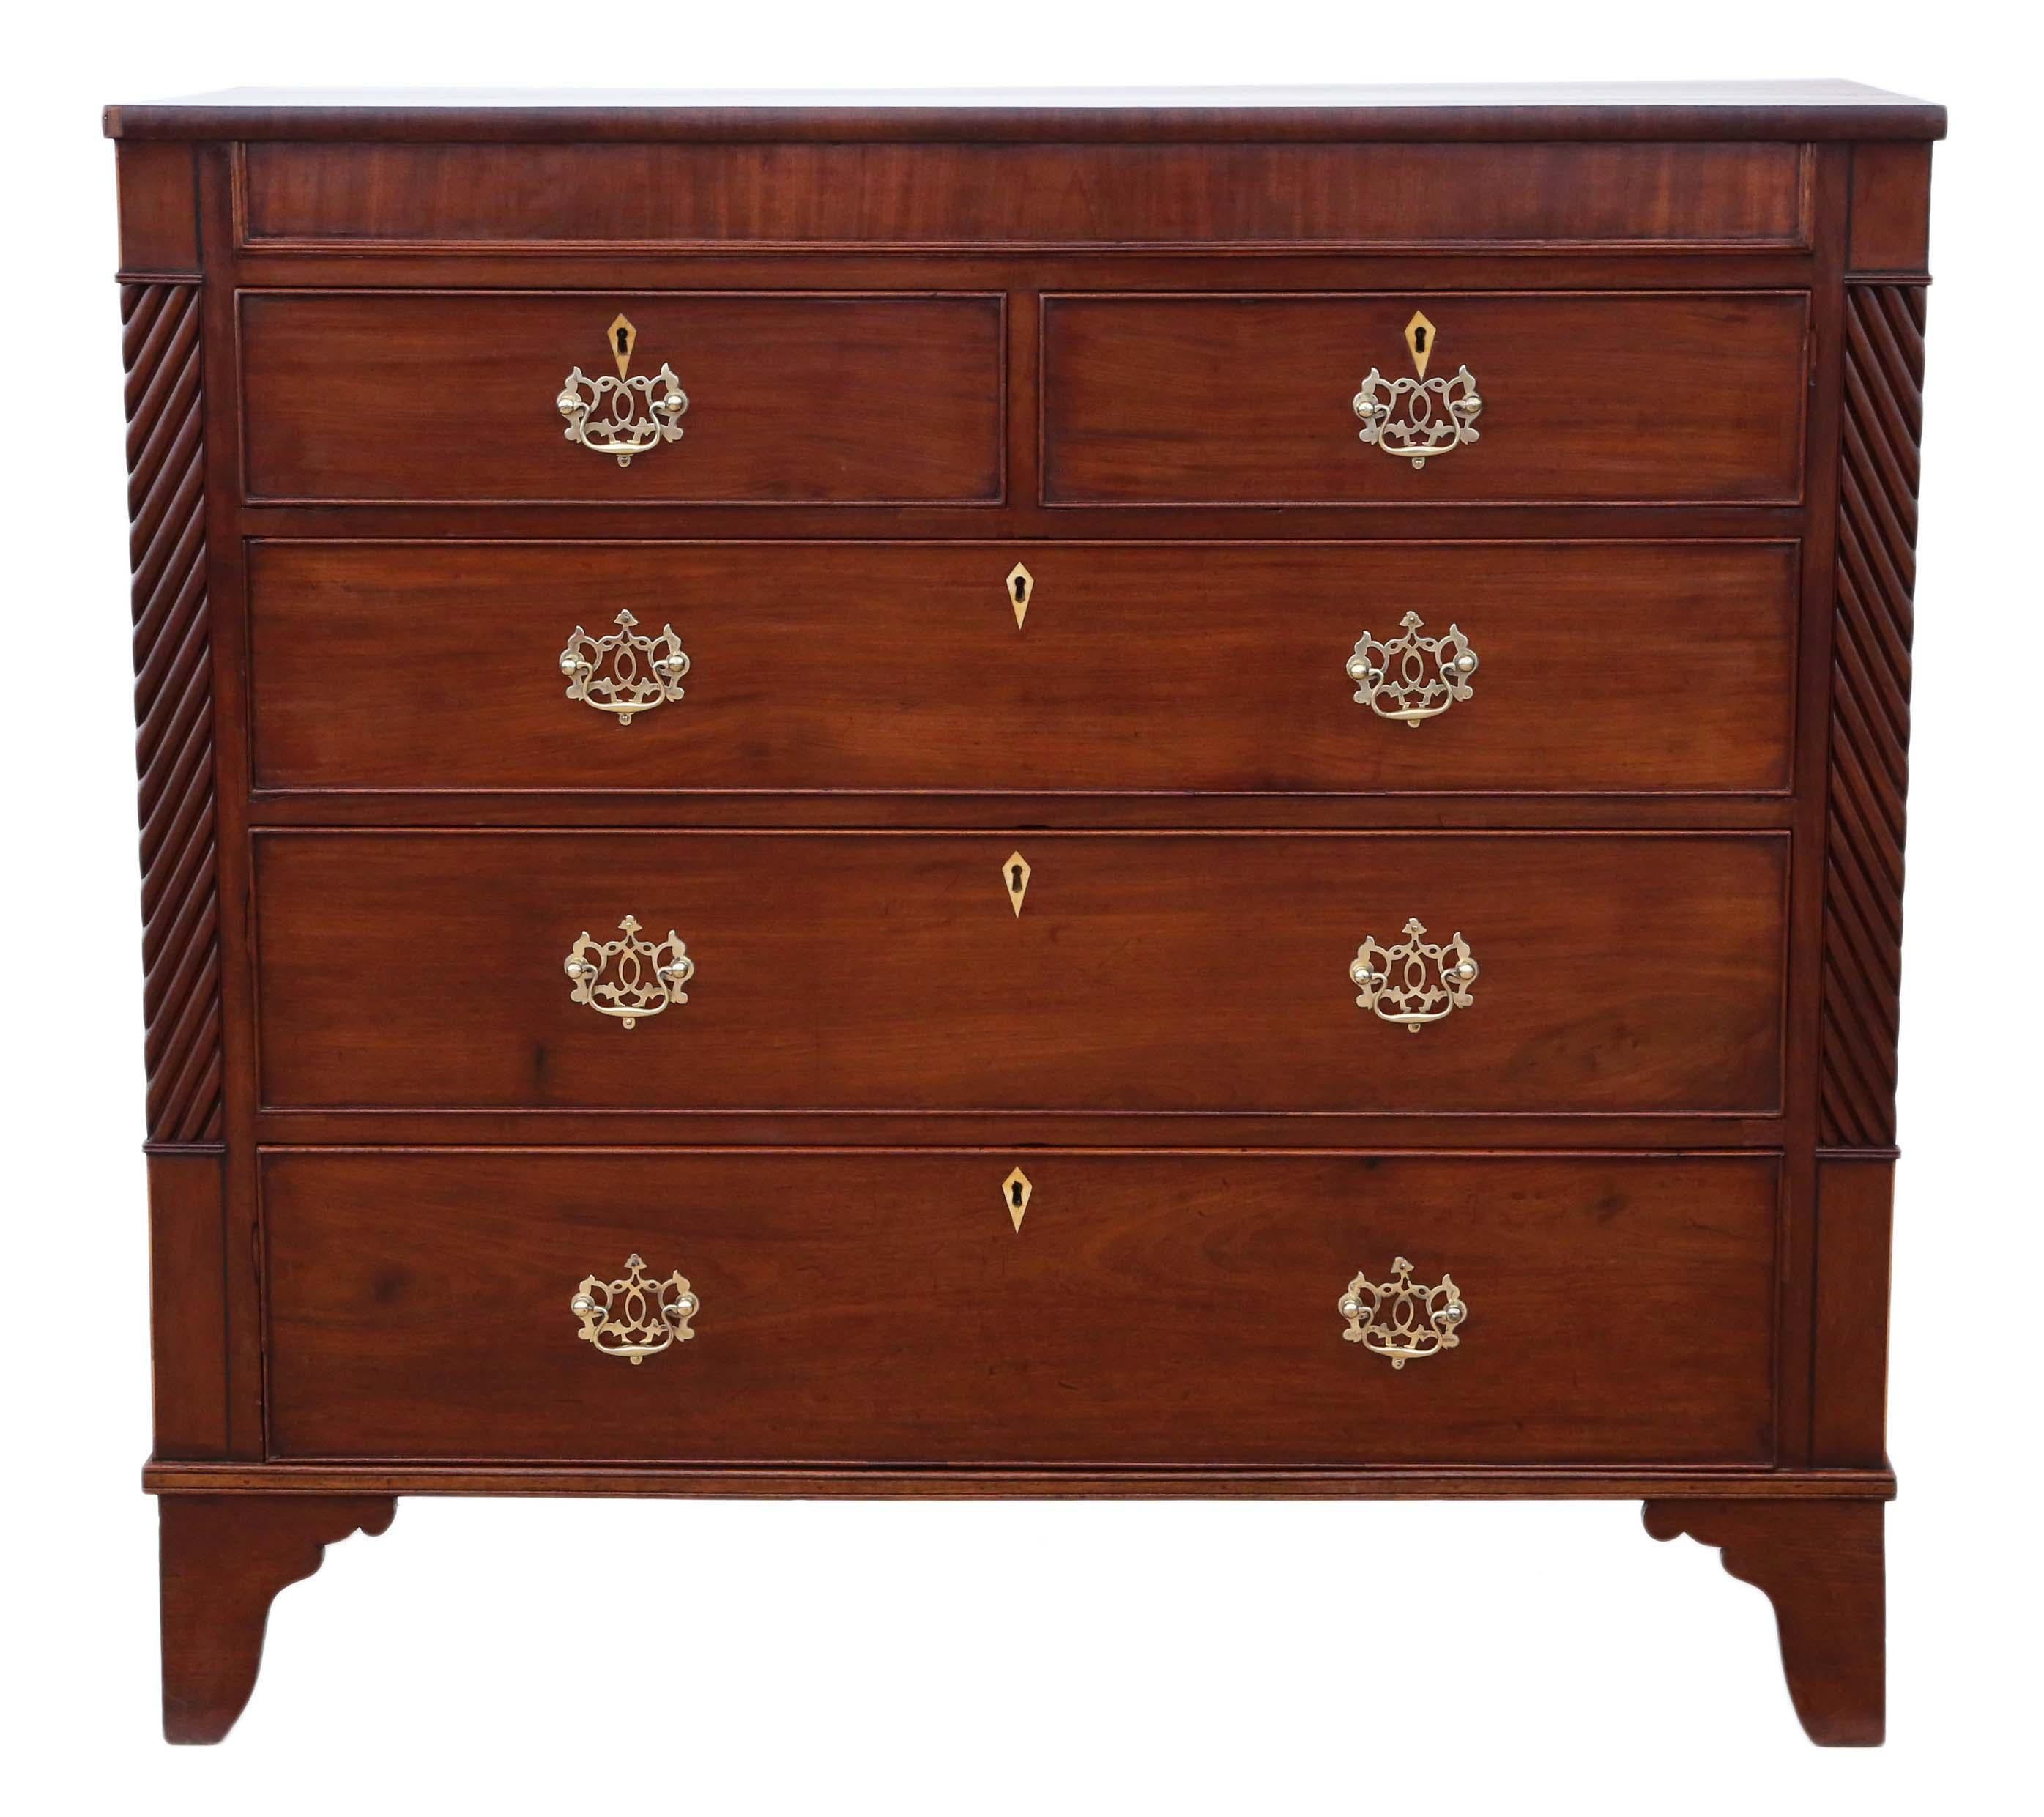 Antique fine quality Georgian large mahogany chest of drawers C1815.
This is a lovely chest.
Solid, no loose joints and no woodworm.
The drawers slide freely. We have no keys and the locks are consequently untested.
Overall maximum dimensions: